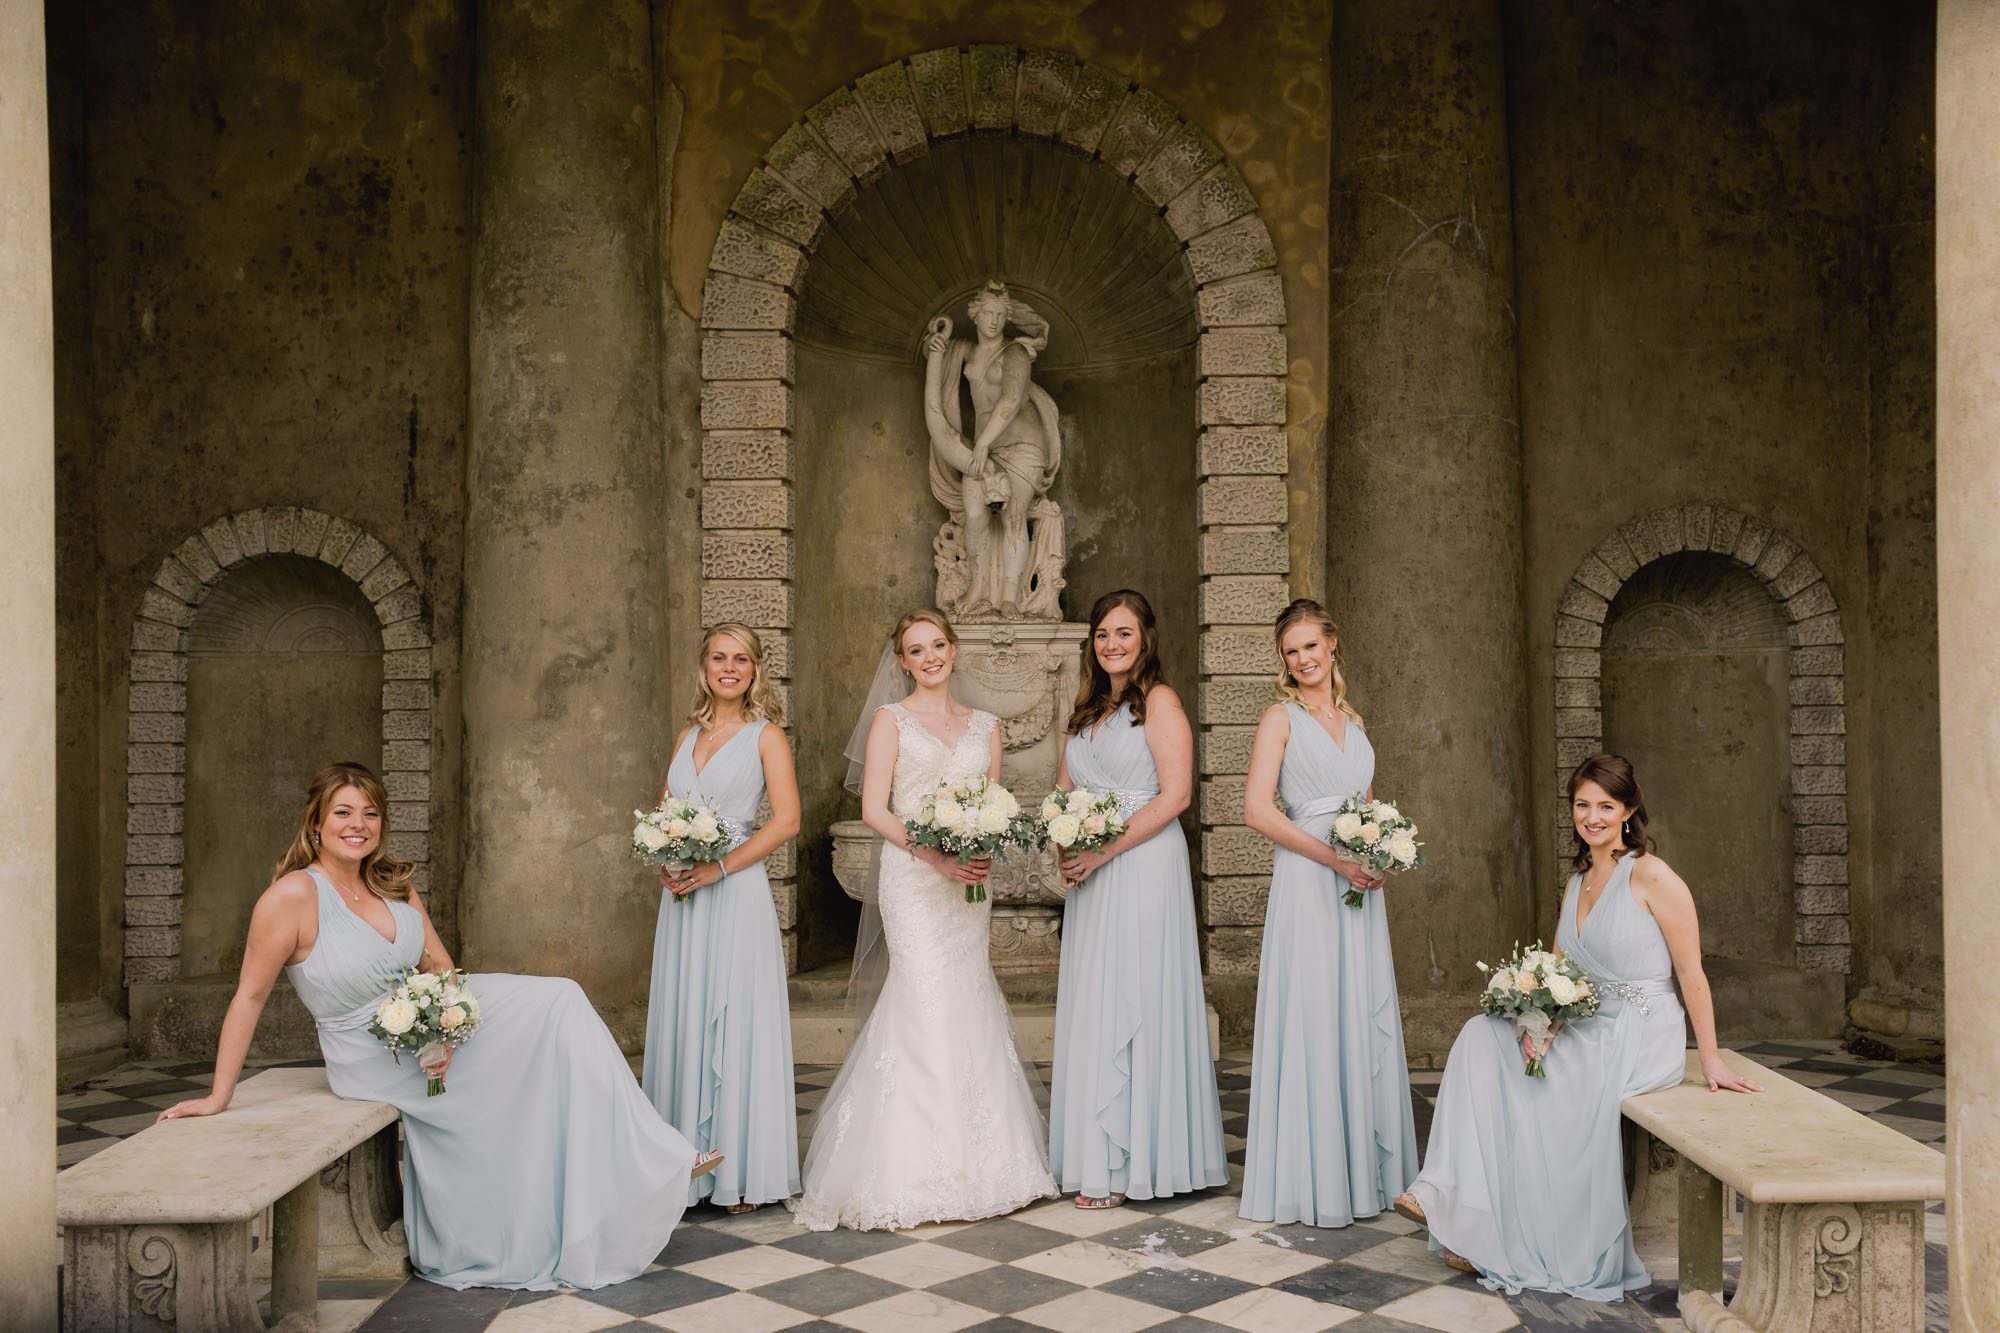 Bride and her bridesmaids pose for a group shot at Wotton House.